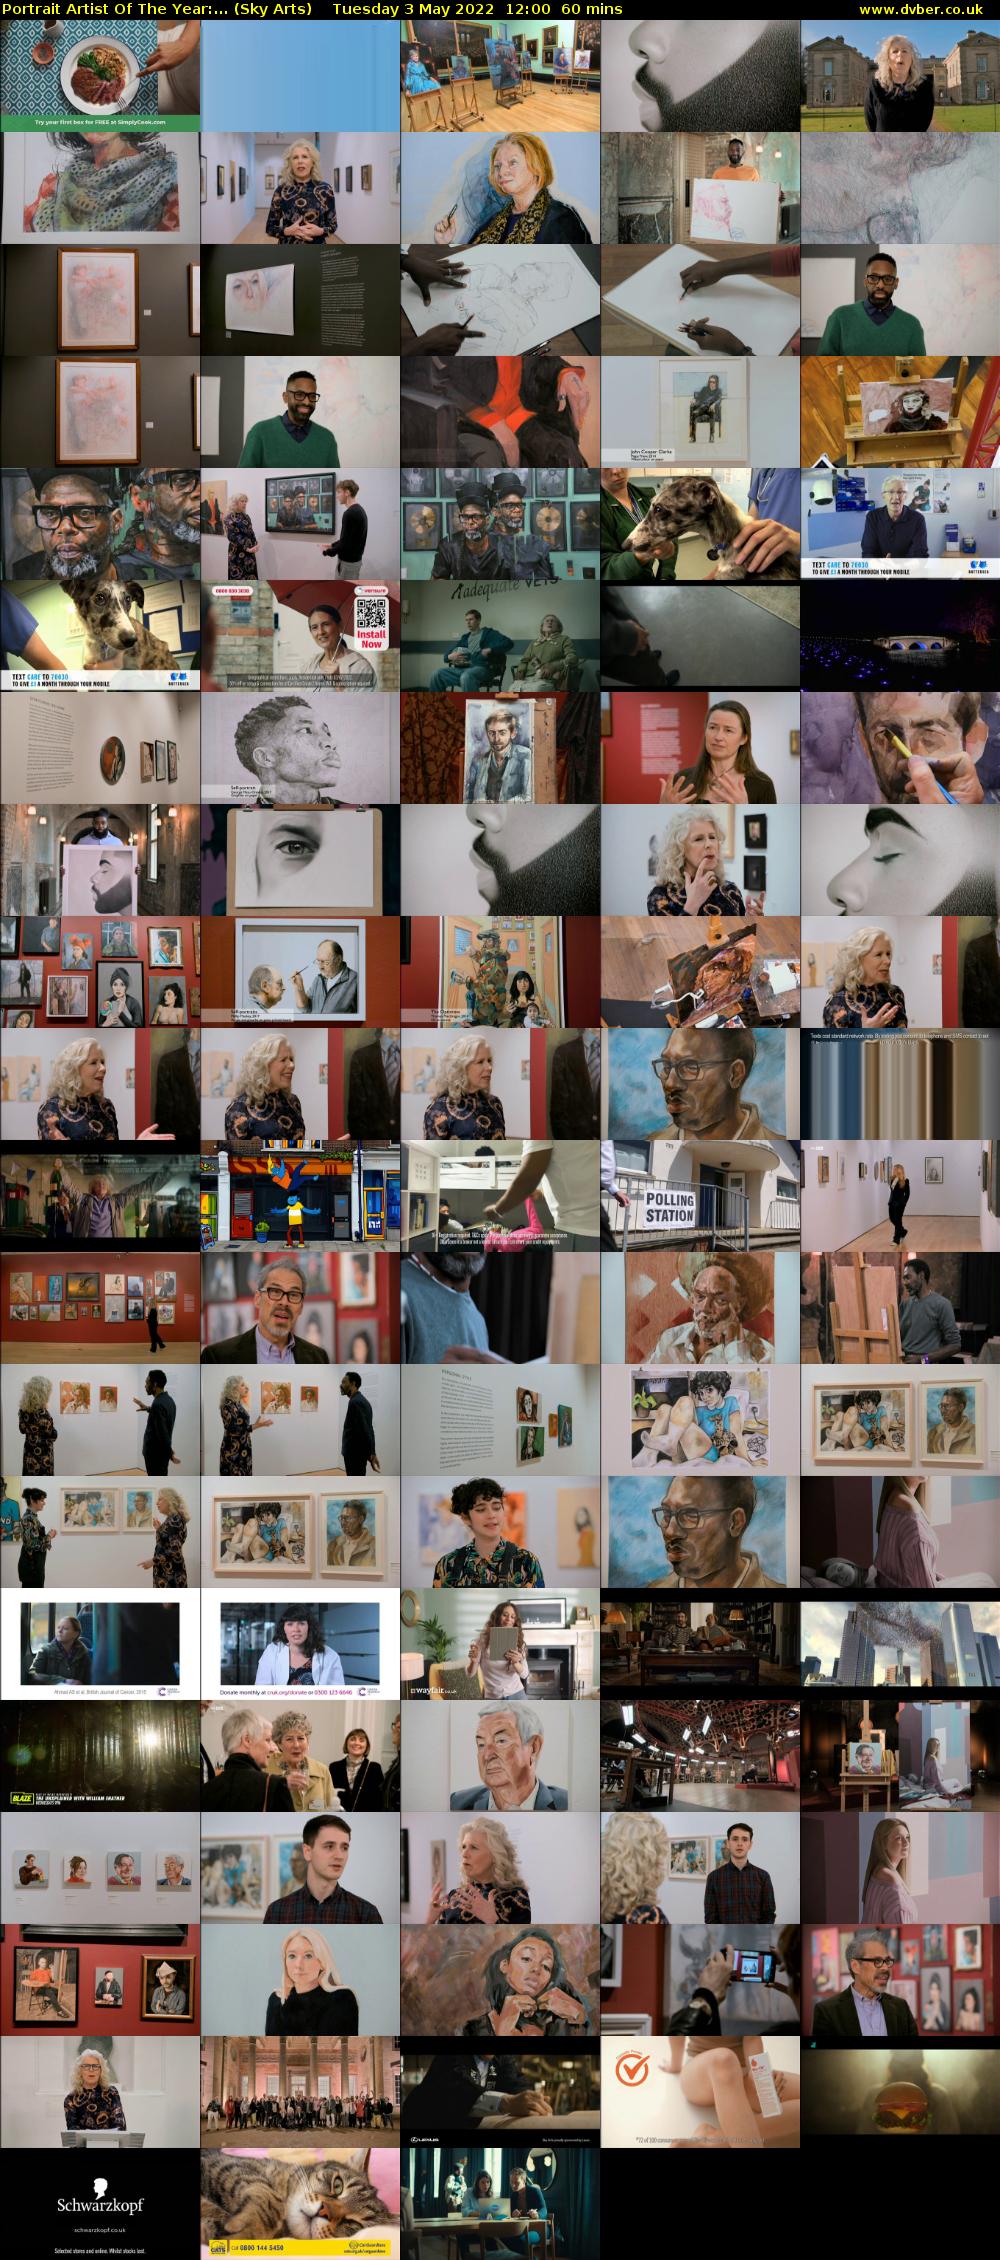 Portrait Artist Of The Year:... (Sky Arts) Tuesday 3 May 2022 12:00 - 13:00